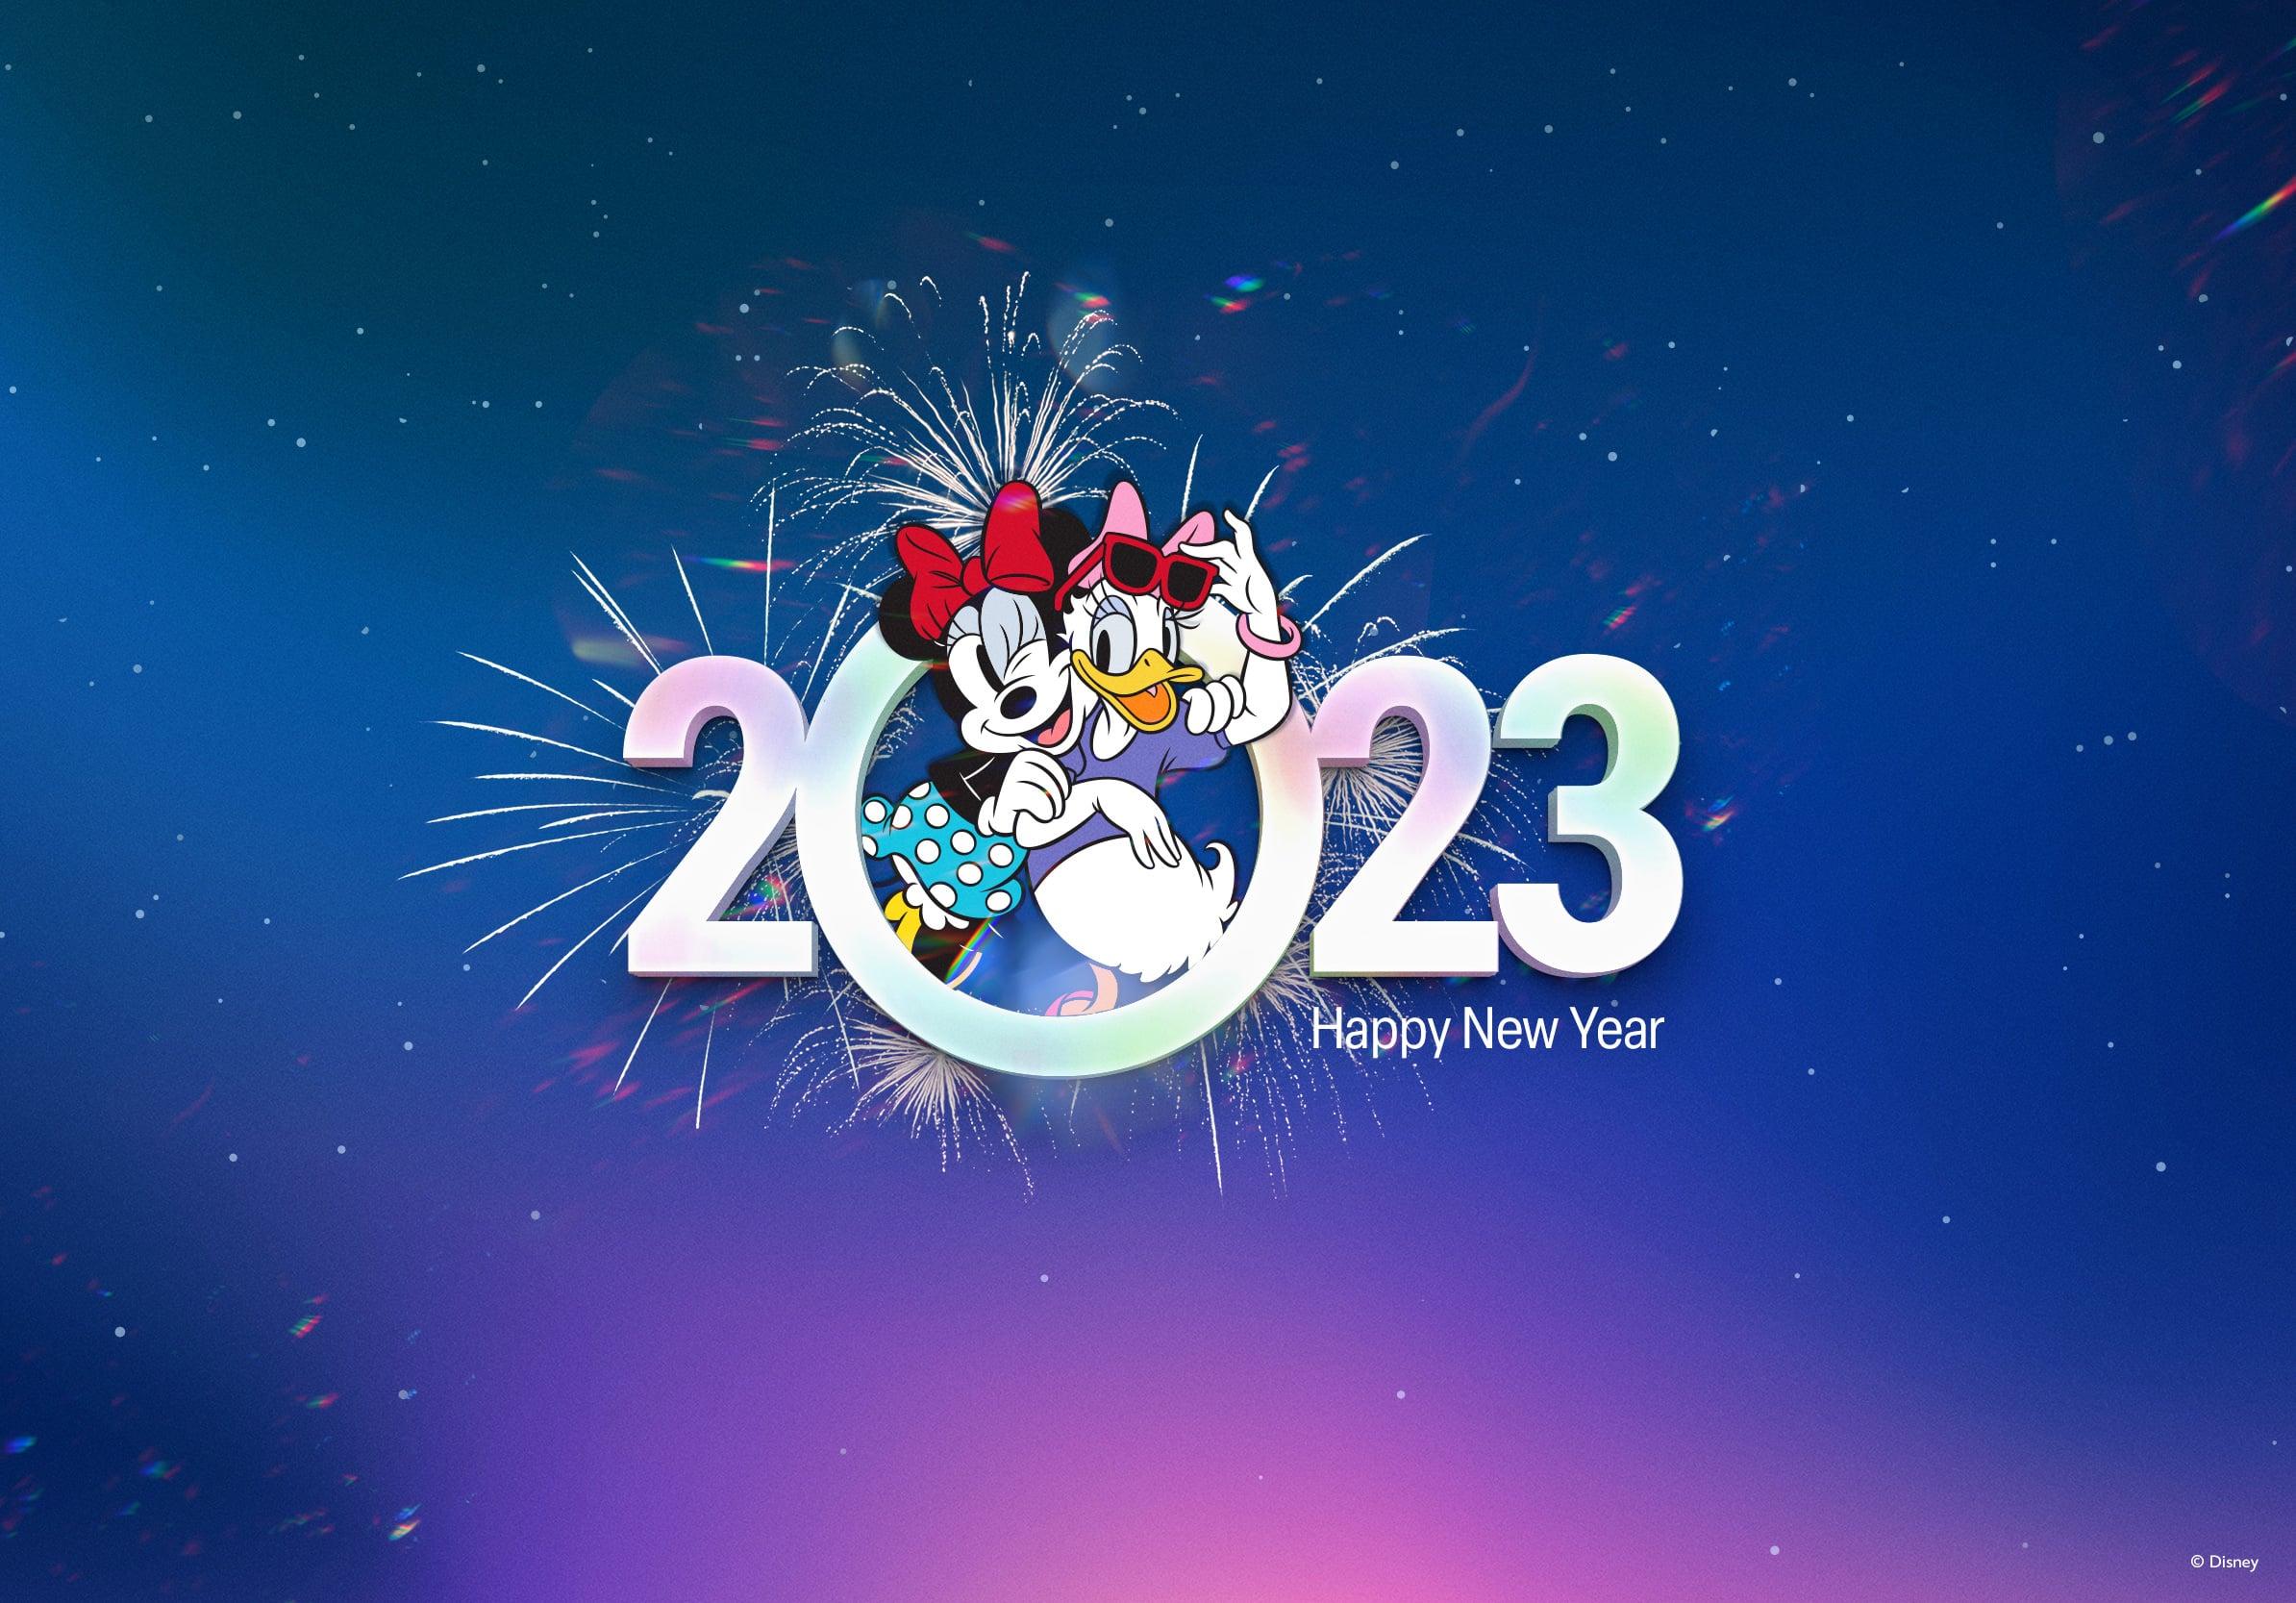 Happy New Year 2023 from Minnie Mouse and Daisy Duck Desktop